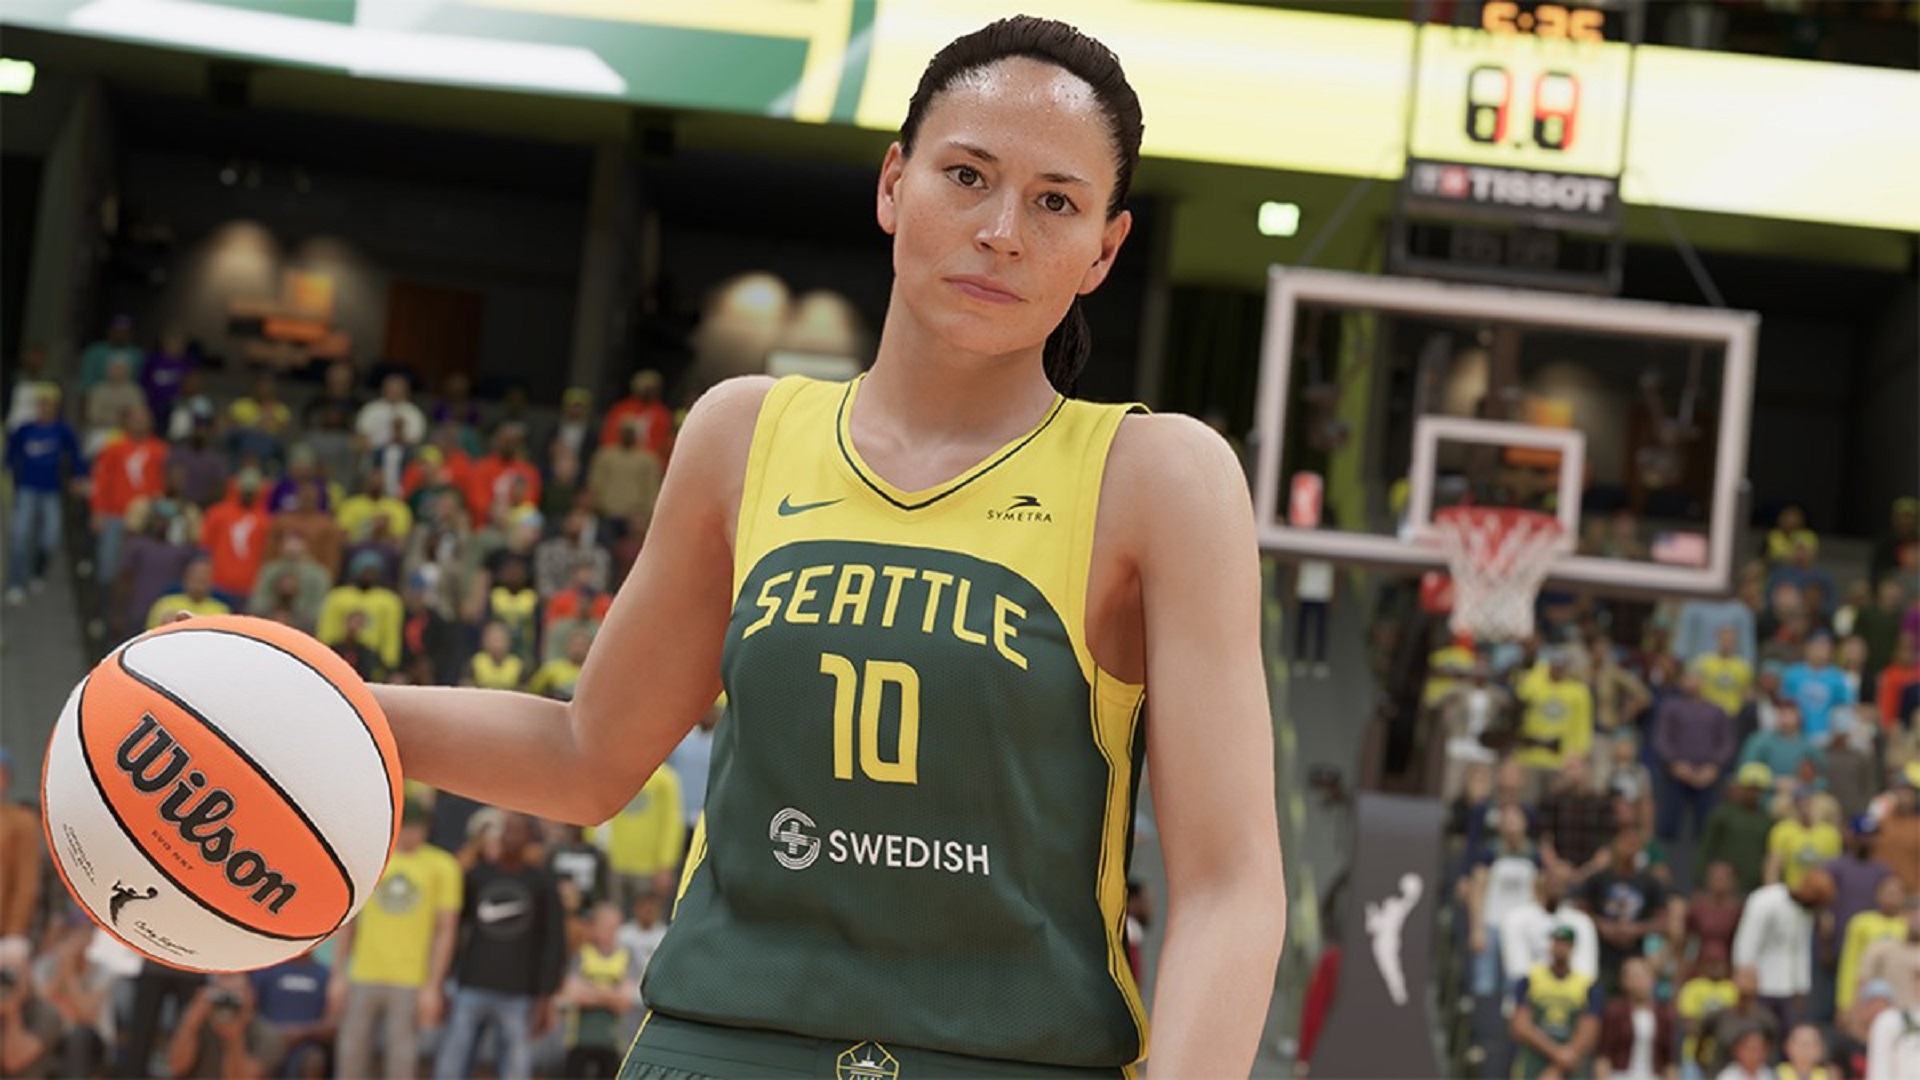 NBA 2K20: All of the players with the best handles in MyTeam